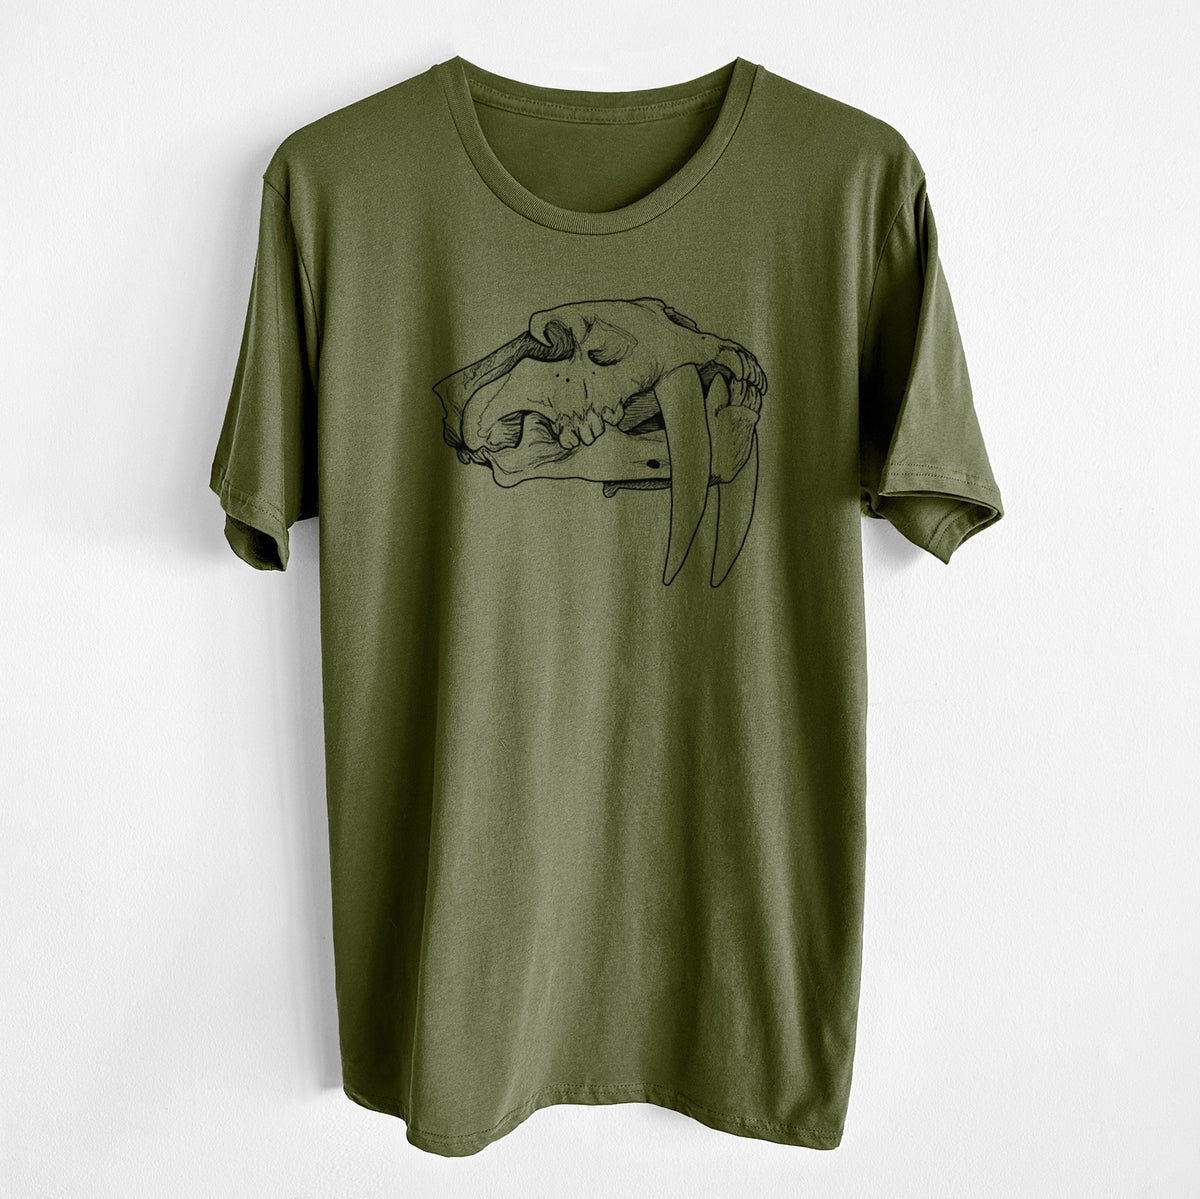 Saber-toothed Tiger Skull - Unisex Crewneck - Made in USA - 100% Organic Cotton